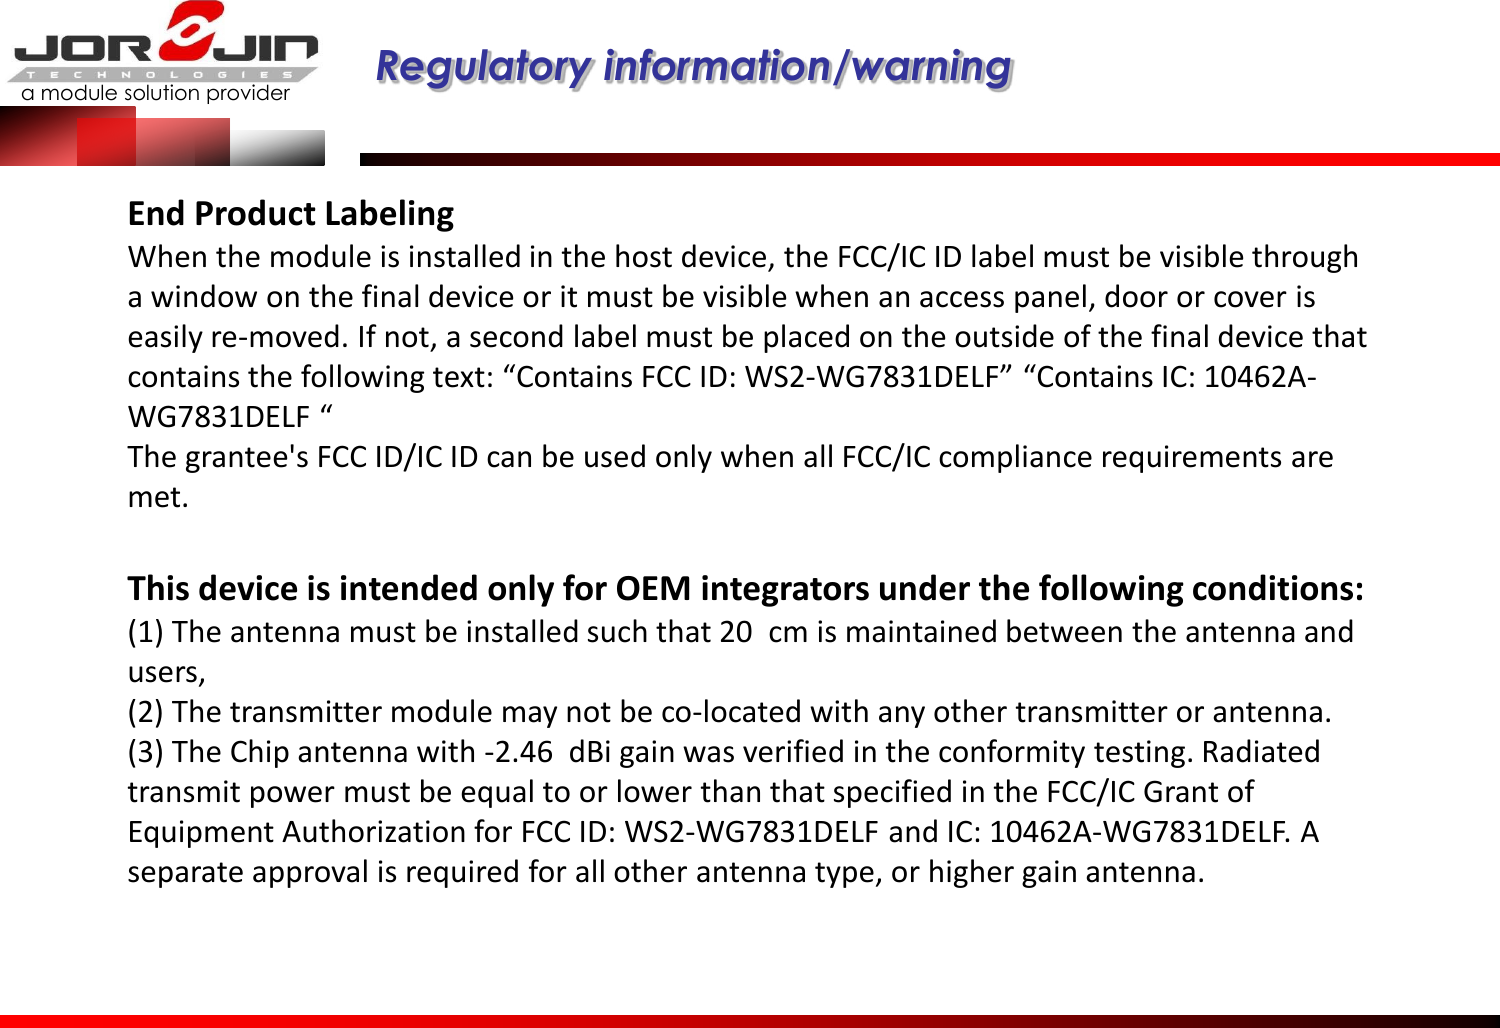 a module solution provider  Regulatory information/warning   End Product Labeling When the module is installed in the host device, the FCC/IC ID label must be visible through a window on the final device or it must be visible when an access panel, door or cover is easily re-moved. If not, a second label must be placed on the outside of the final device that contains the following text: “Contains FCC ID: WS2-WG7831DELF” “Contains IC: 10462A-WG7831DELF “  The grantee&apos;s FCC ID/IC ID can be used only when all FCC/IC compliance requirements are met.     This device is intended only for OEM integrators under the following conditions: (1) The antenna must be installed such that 20  cm is maintained between the antenna and users,   (2) The transmitter module may not be co-located with any other transmitter or antenna. (3) The Chip antenna with -2.46  dBi gain was verified in the conformity testing. Radiated transmit power must be equal to or lower than that specified in the FCC/IC Grant of Equipment Authorization for FCC ID: WS2-WG7831DELF and IC: 10462A-WG7831DELF. A separate approval is required for all other antenna type, or higher gain antenna.    